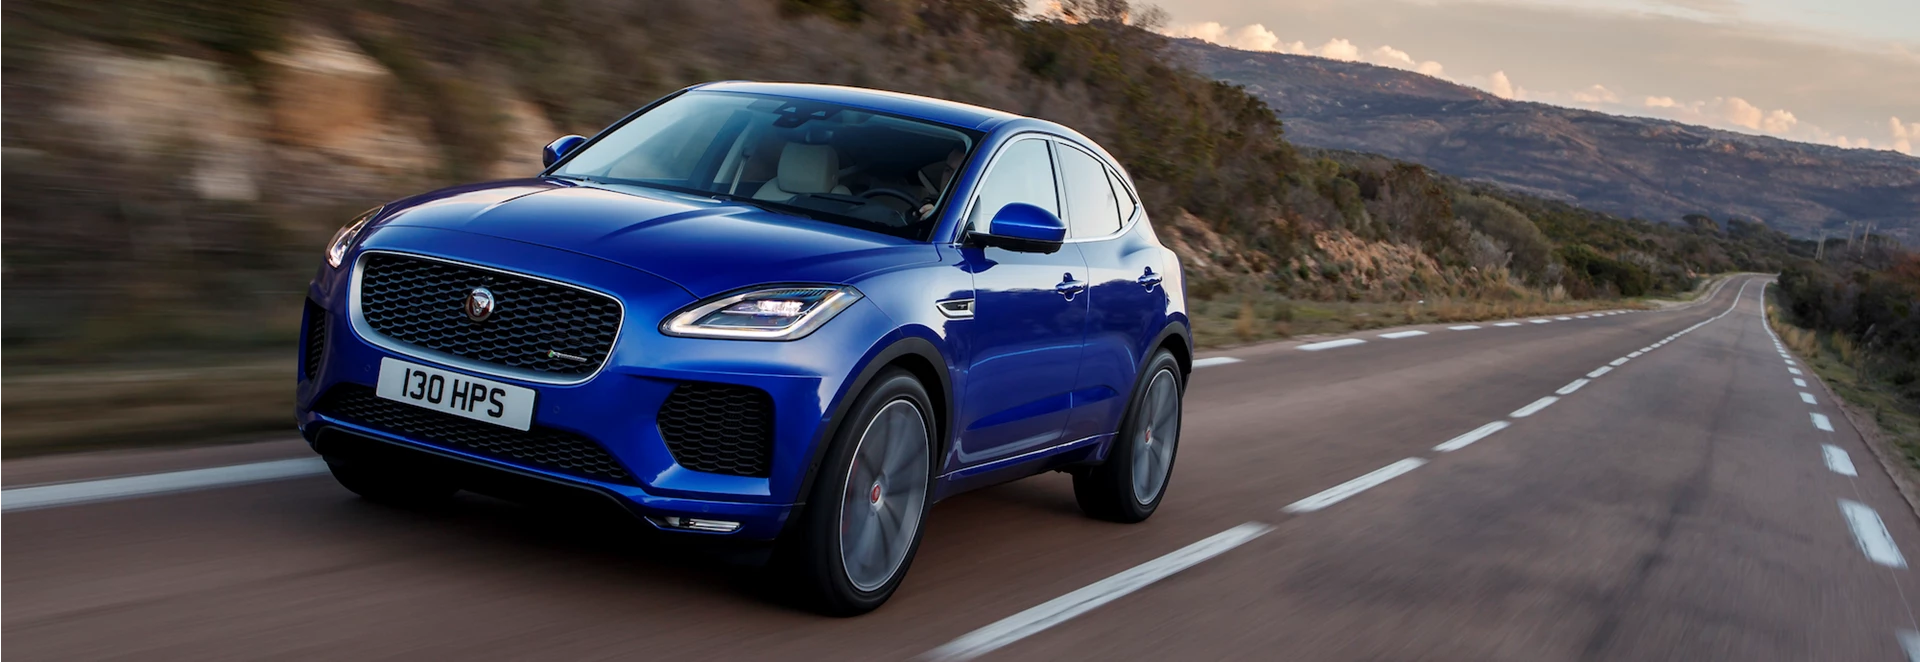 Jaguar adds new entry-level petrol engine to E-Pace line-up